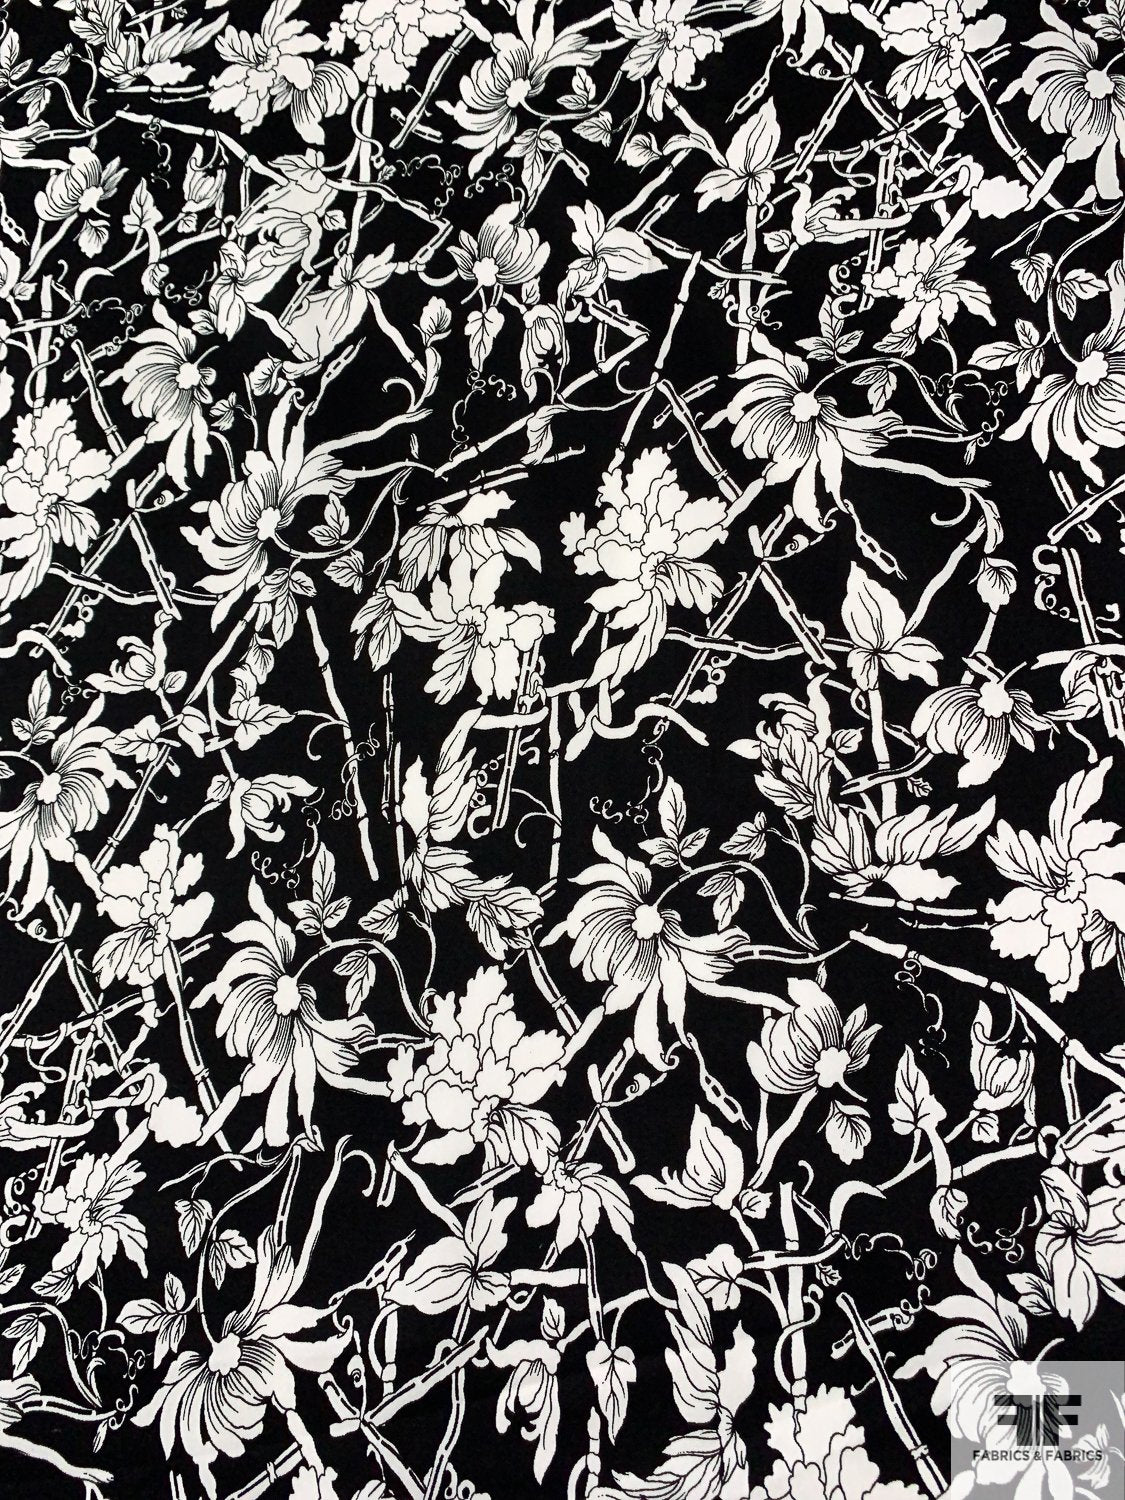 Crawly Floral Printed Cotton Sateen - Black / White